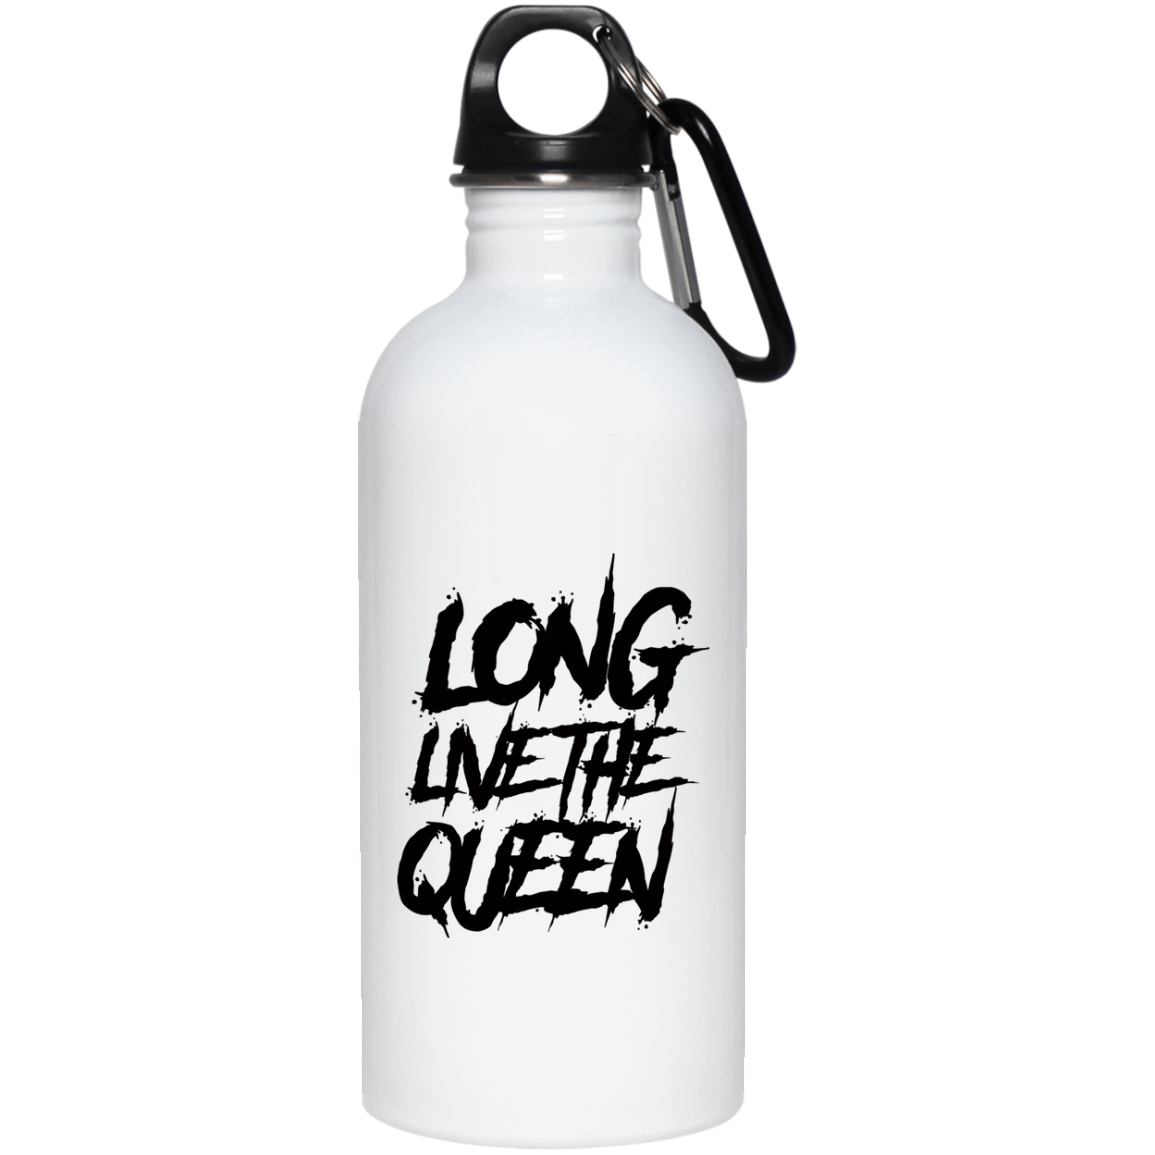 LONG LIVE THE QUEEN STAINLESS STEEL 20 0Z WATER BOTTLE